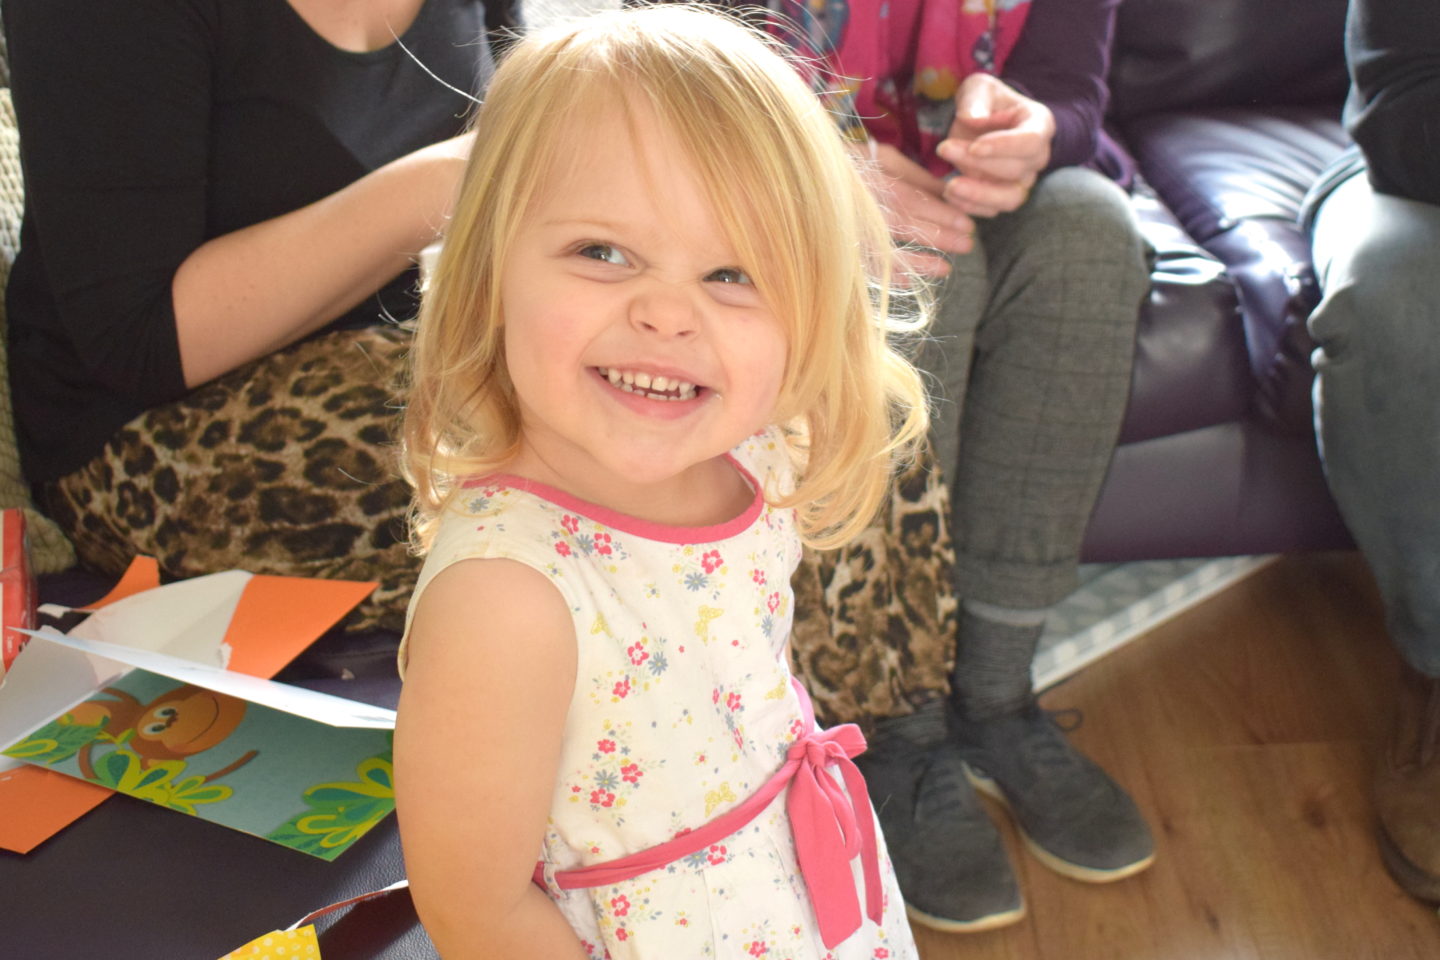 Two year old in a party dress, smiling at the camera